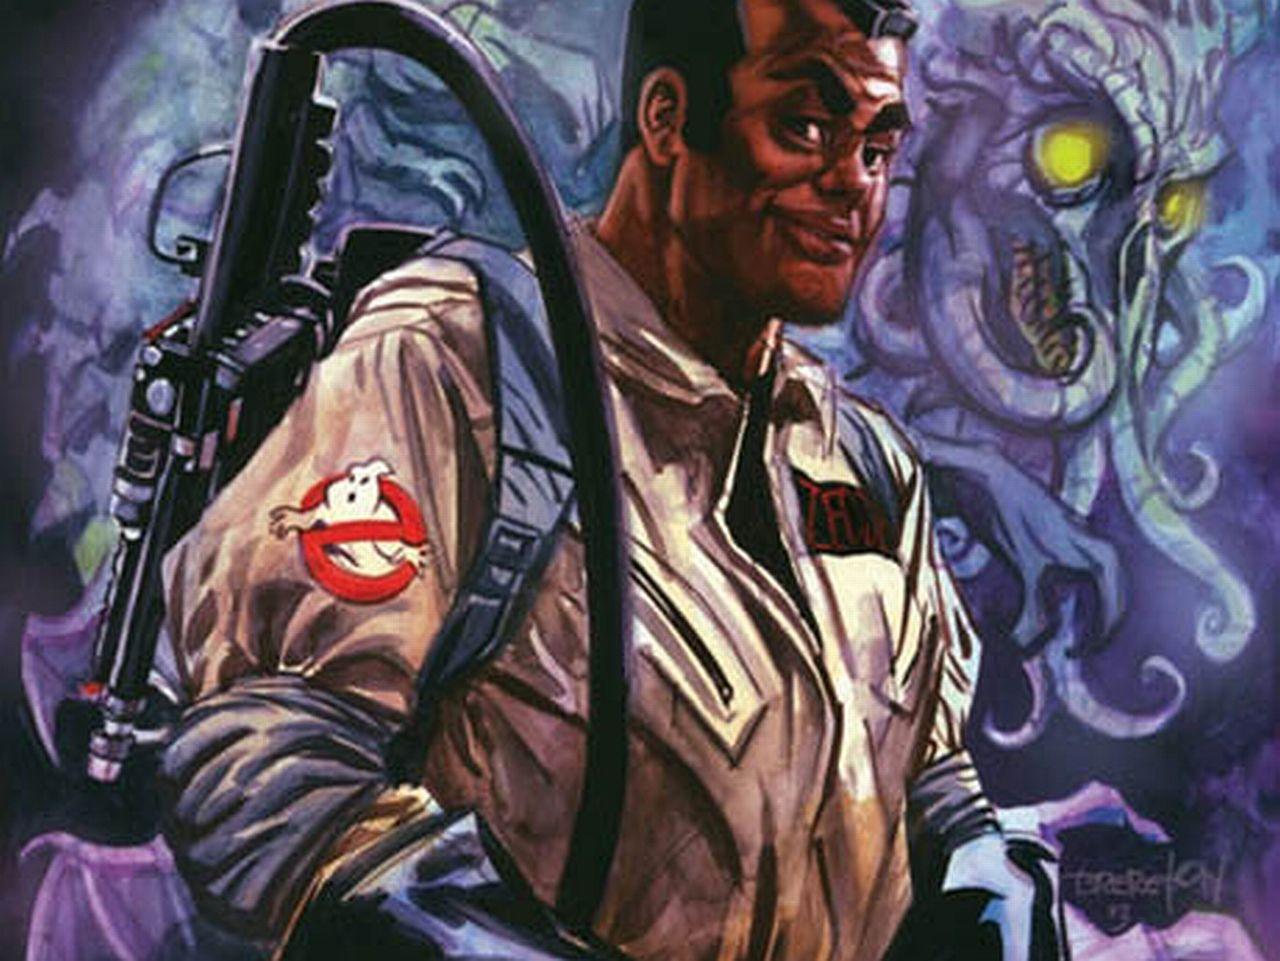 image and art from the original 1984 Ghostbusters movie. Ivan